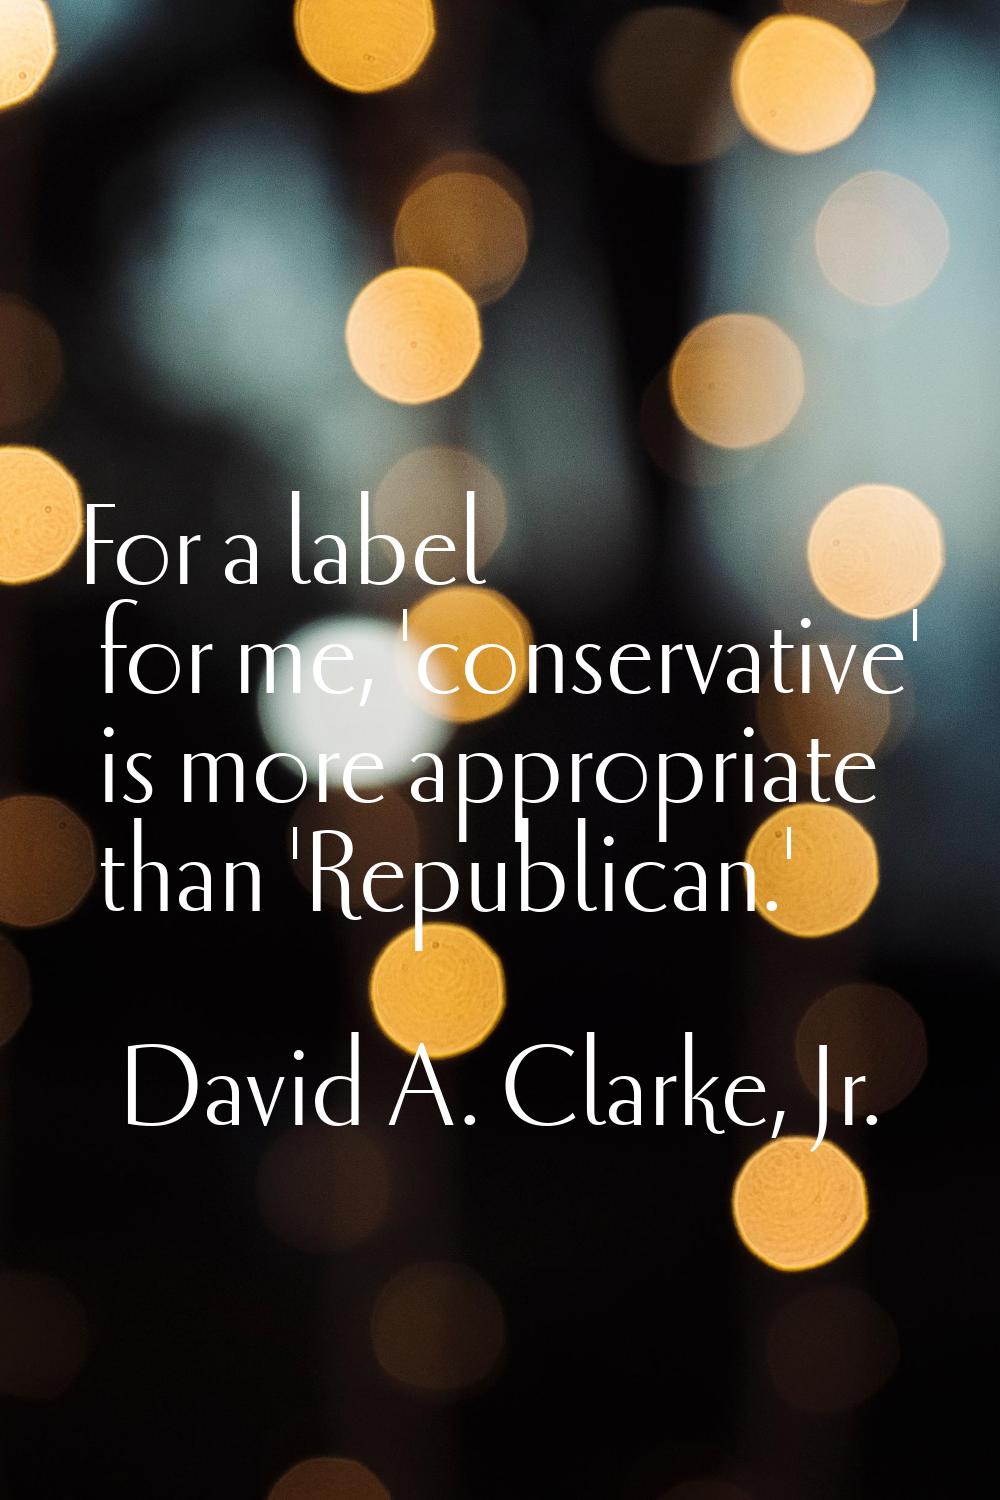 For a label for me, 'conservative' is more appropriate than 'Republican.'